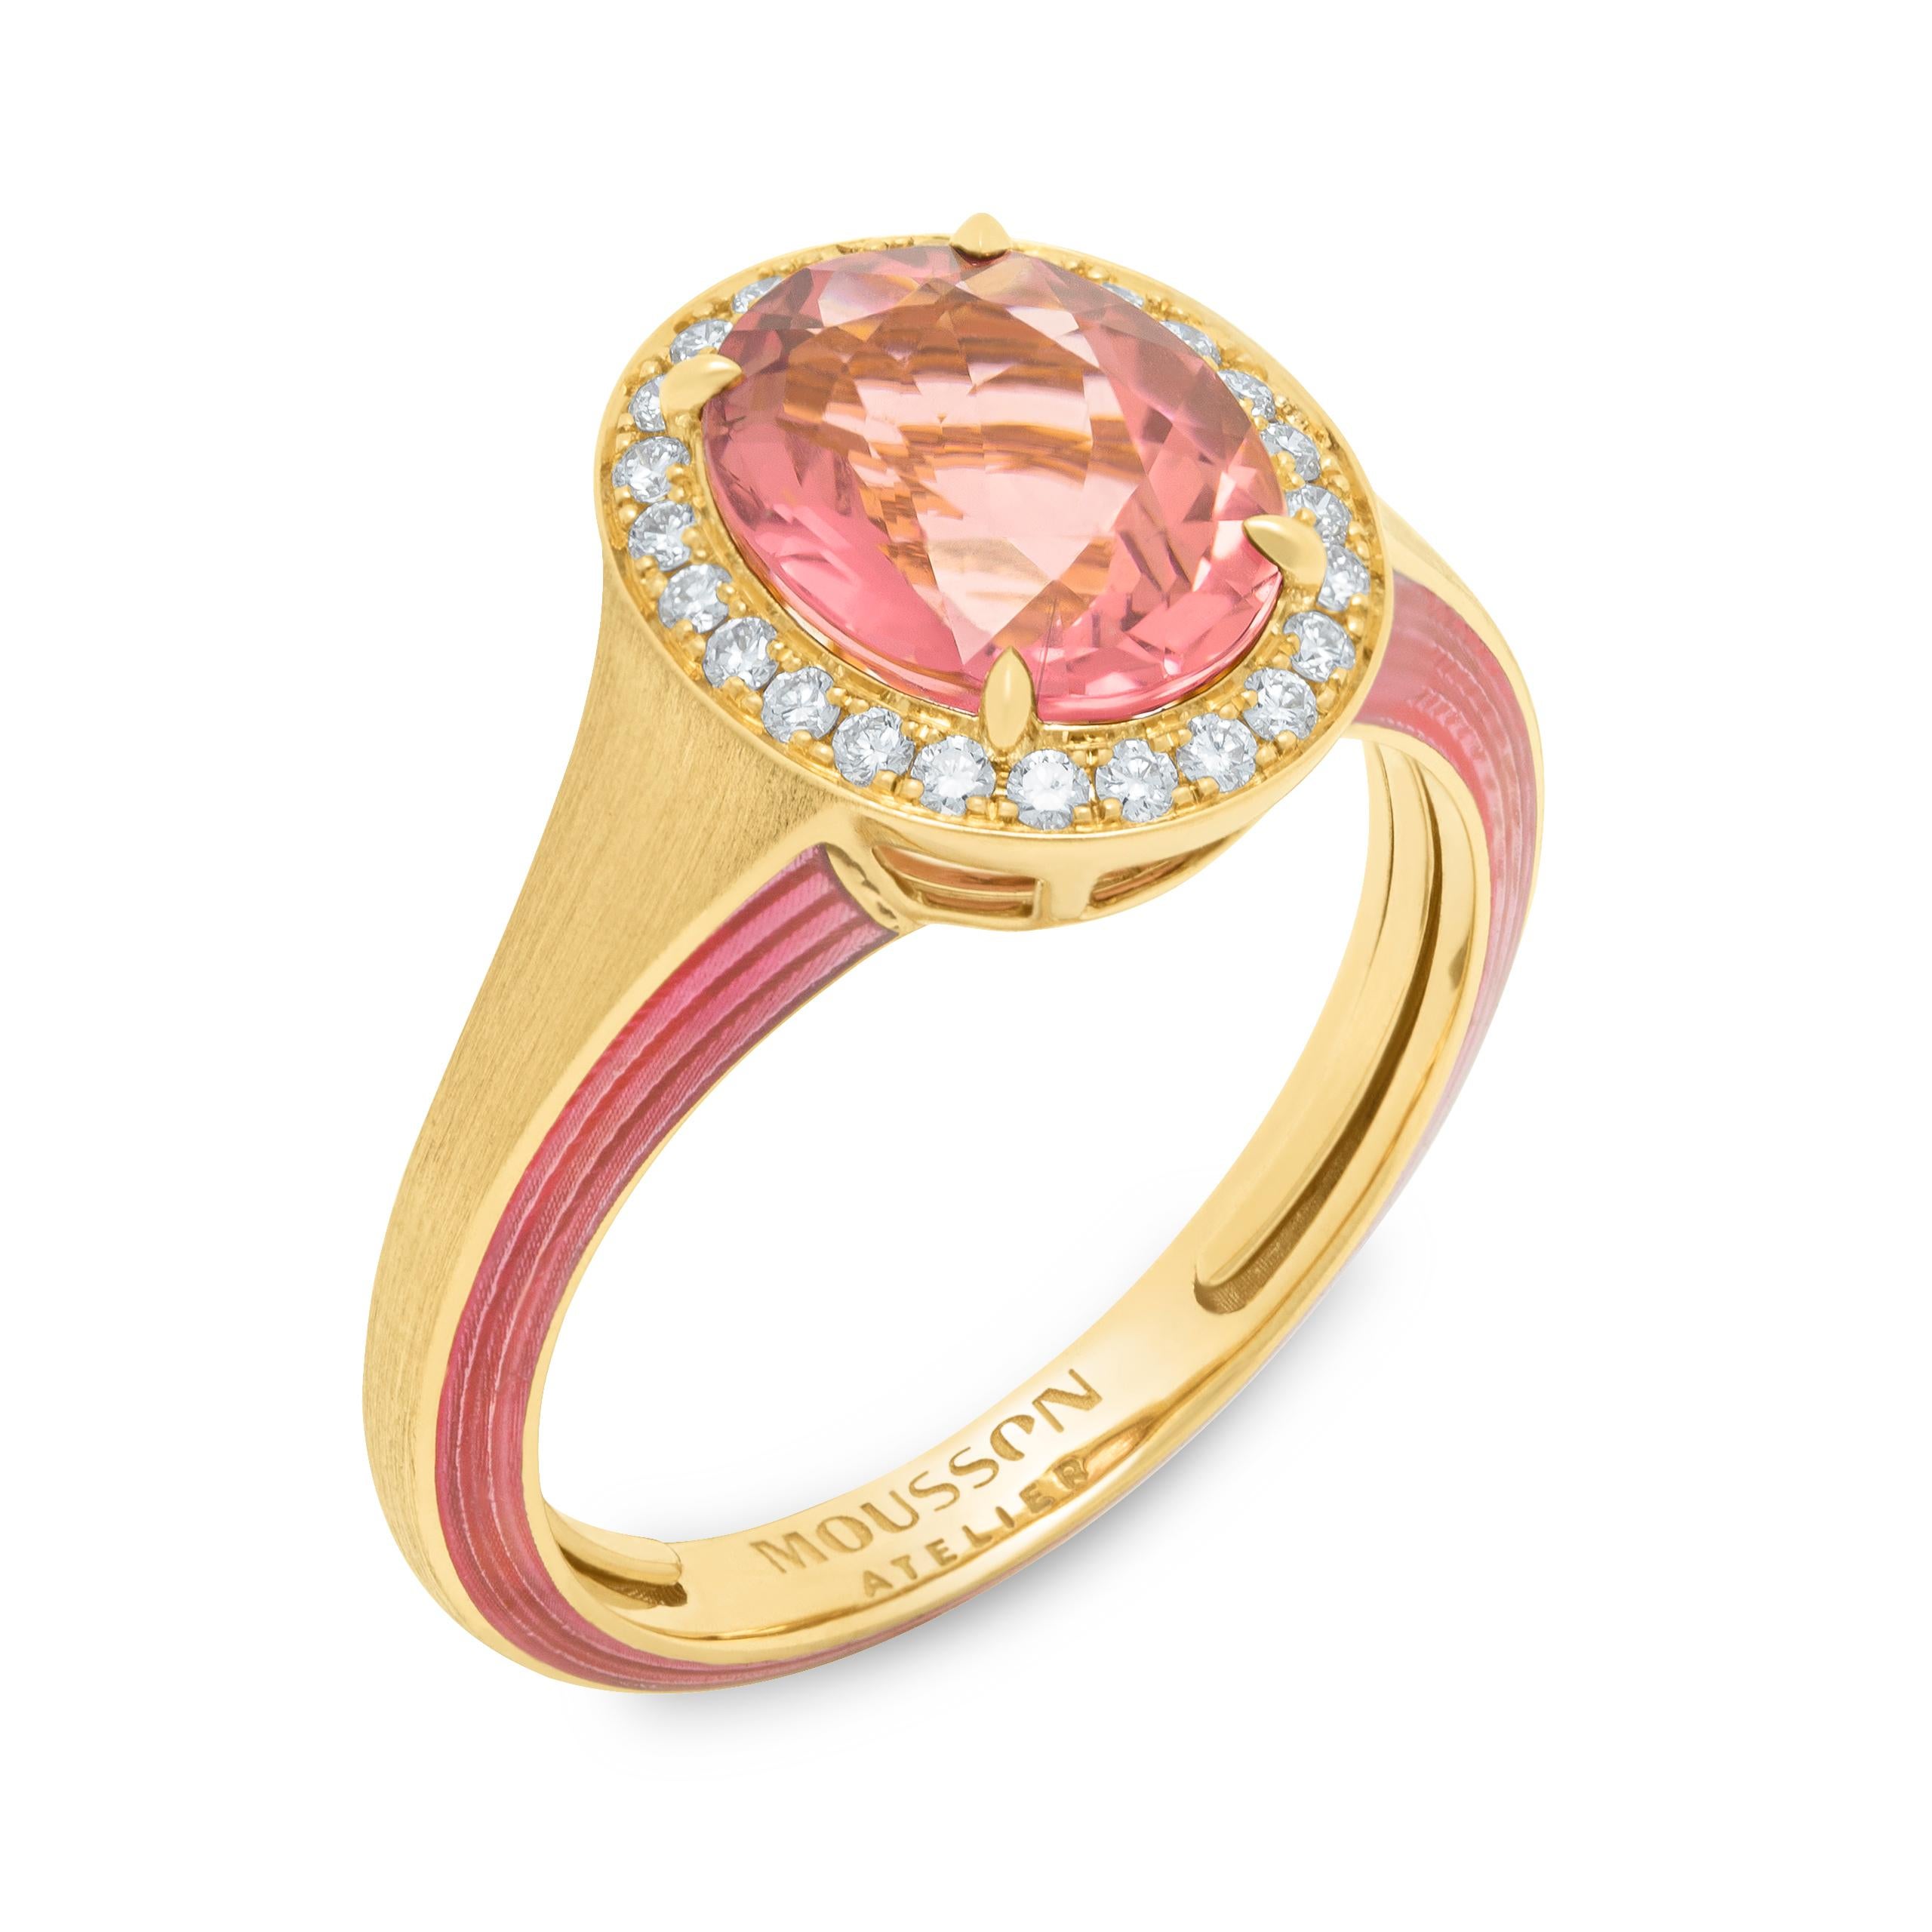 Pink Tourmaline 2.49 Carat Diamonds 18 Karat Yellow Gold Enamel New Classic Ring
We have published a series of new Rings with the same idea but with different details. Introducing a Ring crafted from 18 Karat Yellow Gold, which in company with 2.49